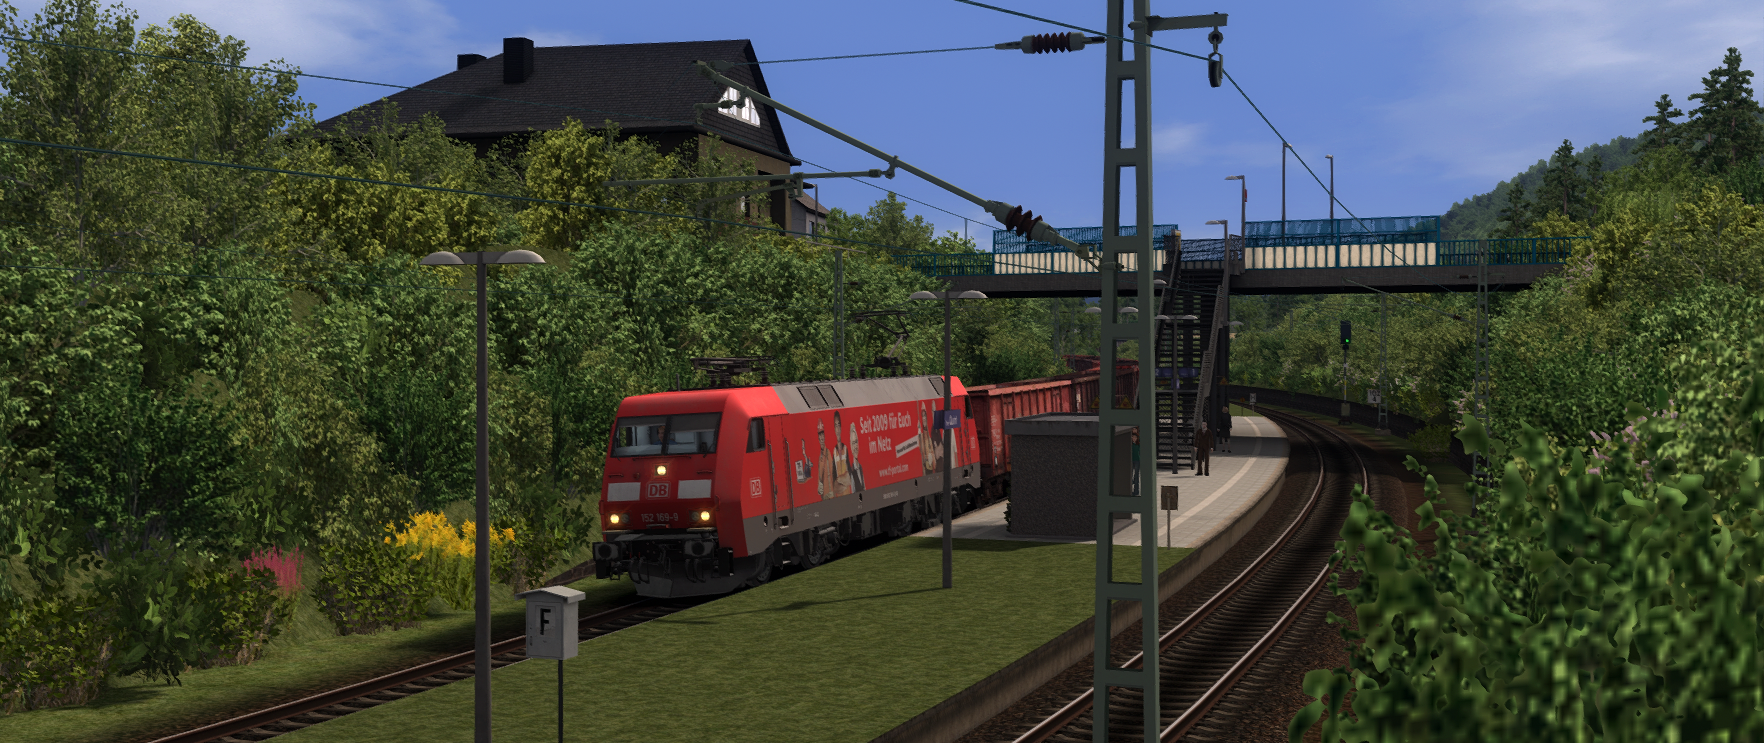 152 169 near the Mosel